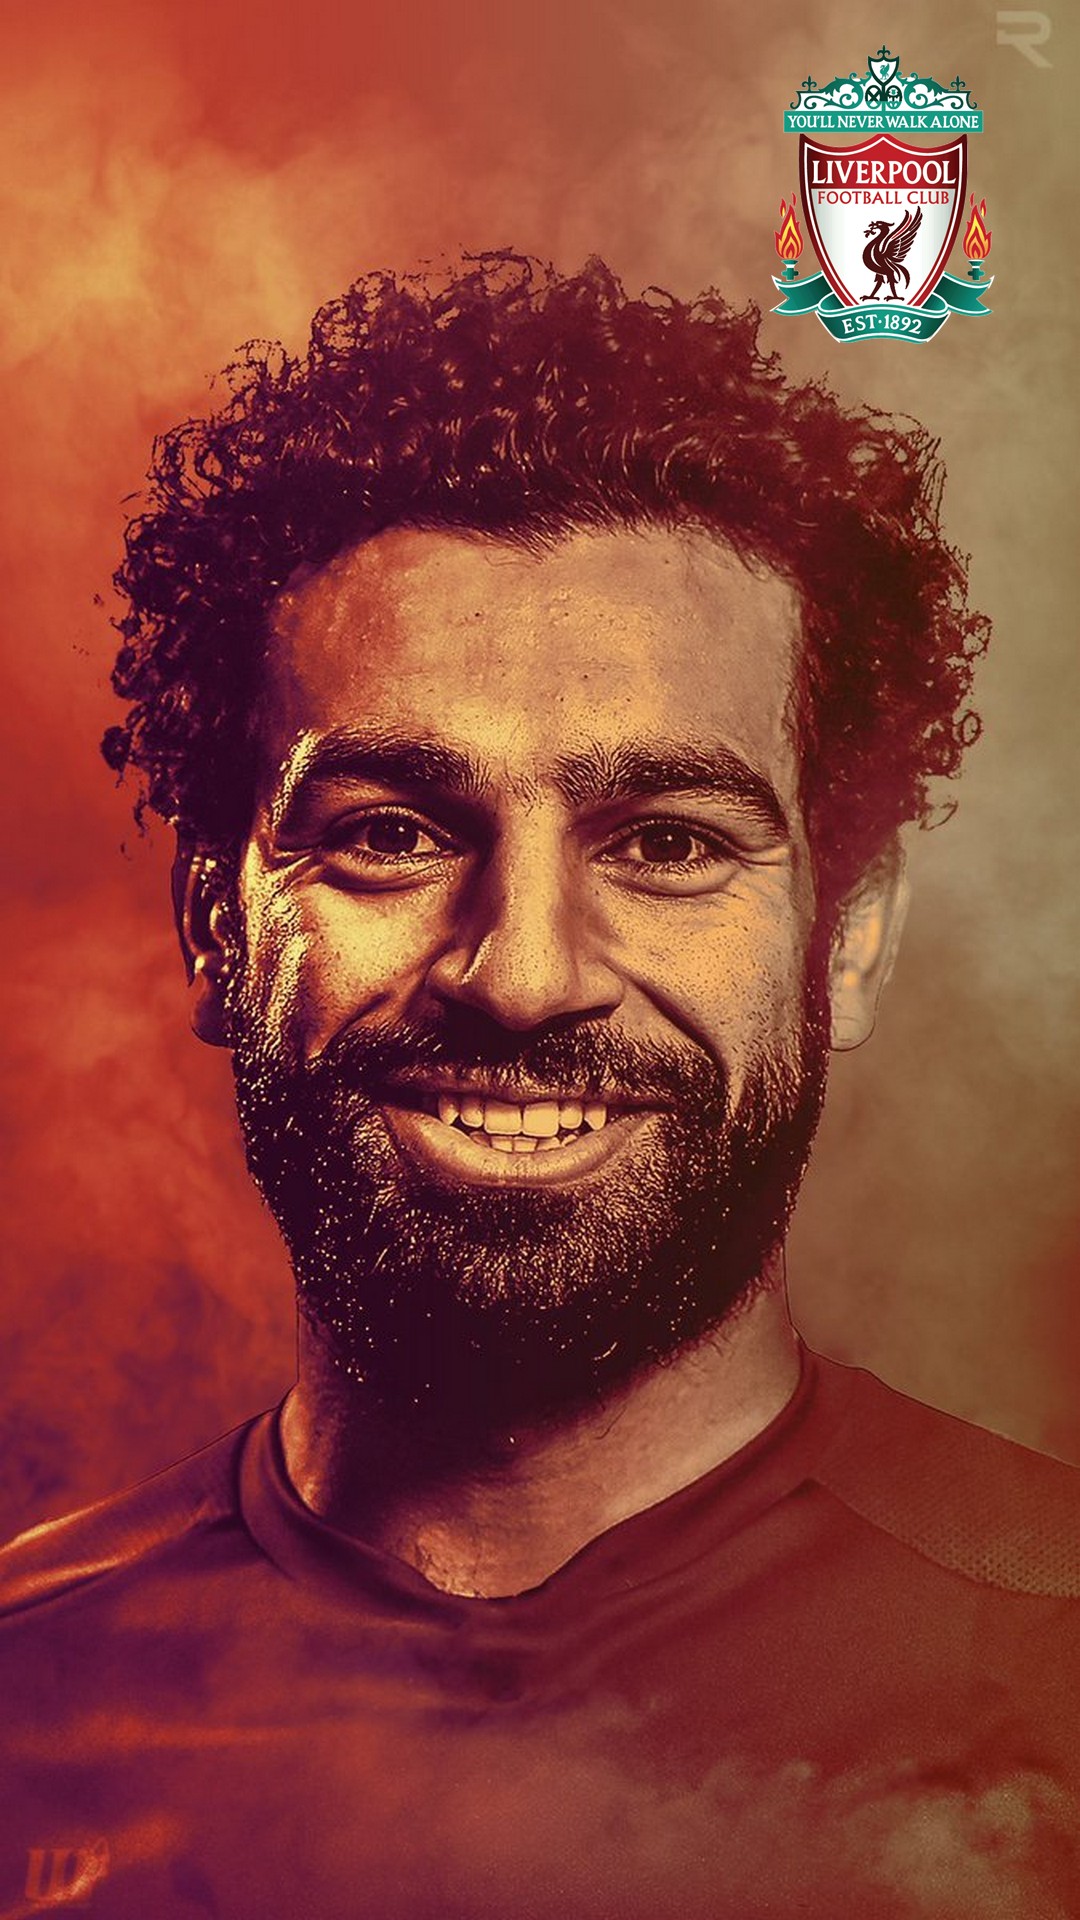 Wallpaper Salah Liverpool iPhone with image resolution 1080x1920 pixel. You can make this wallpaper for your iPhone 5, 6, 7, 8, X backgrounds, Mobile Screensaver, or iPad Lock Screen